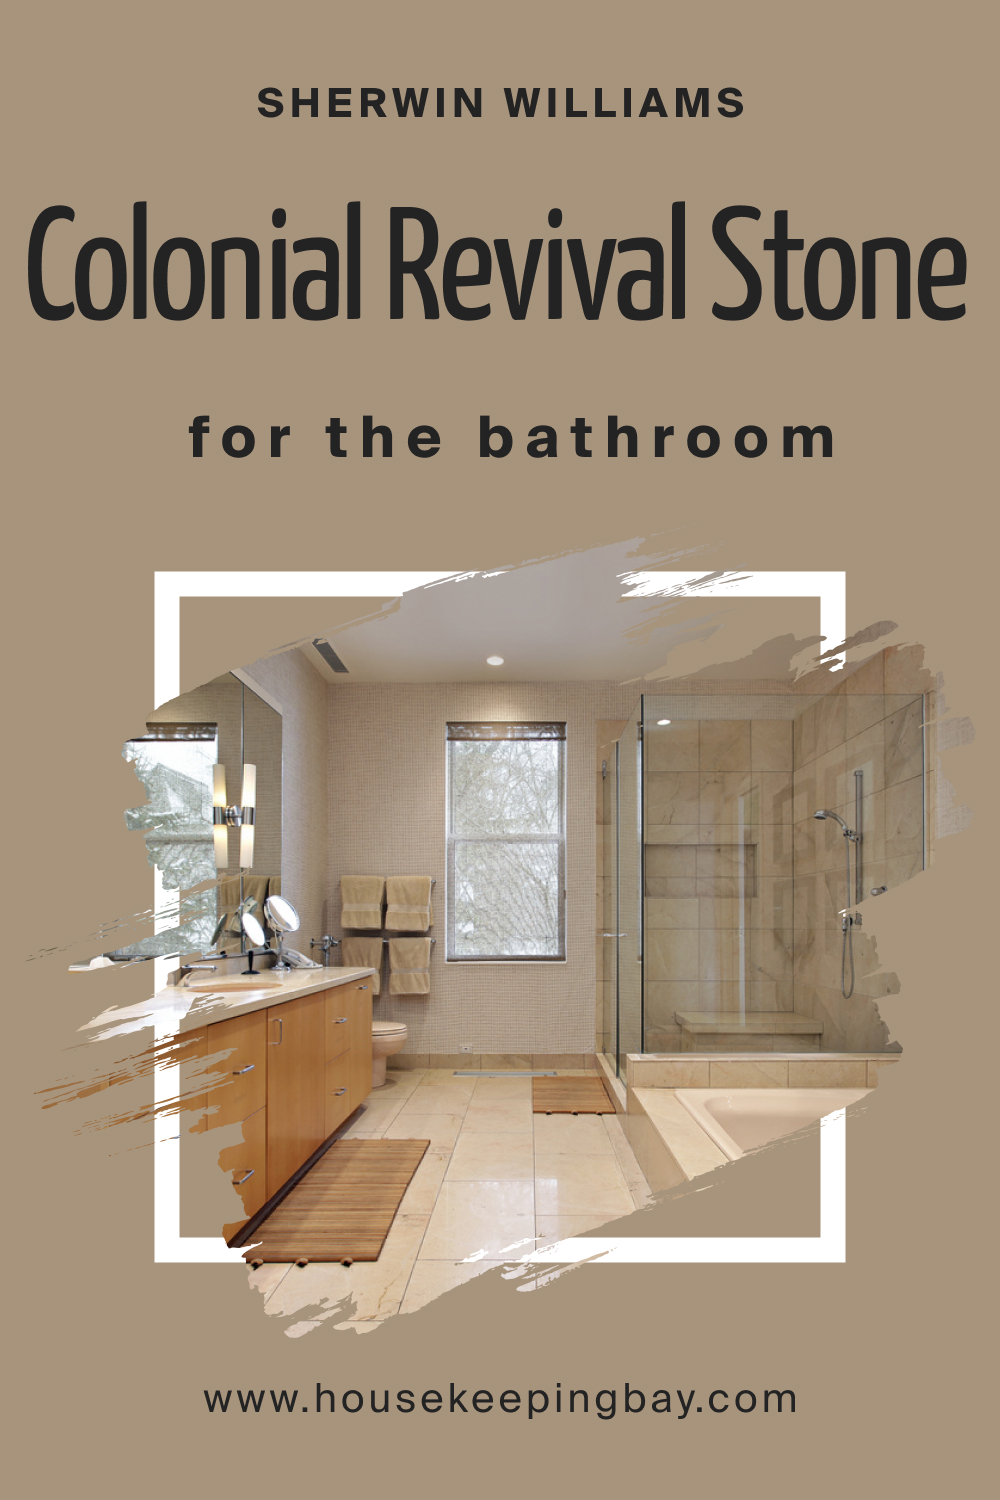 Sherwin Williams. SW 2827 Colonial Revival Stone For the Bathroom